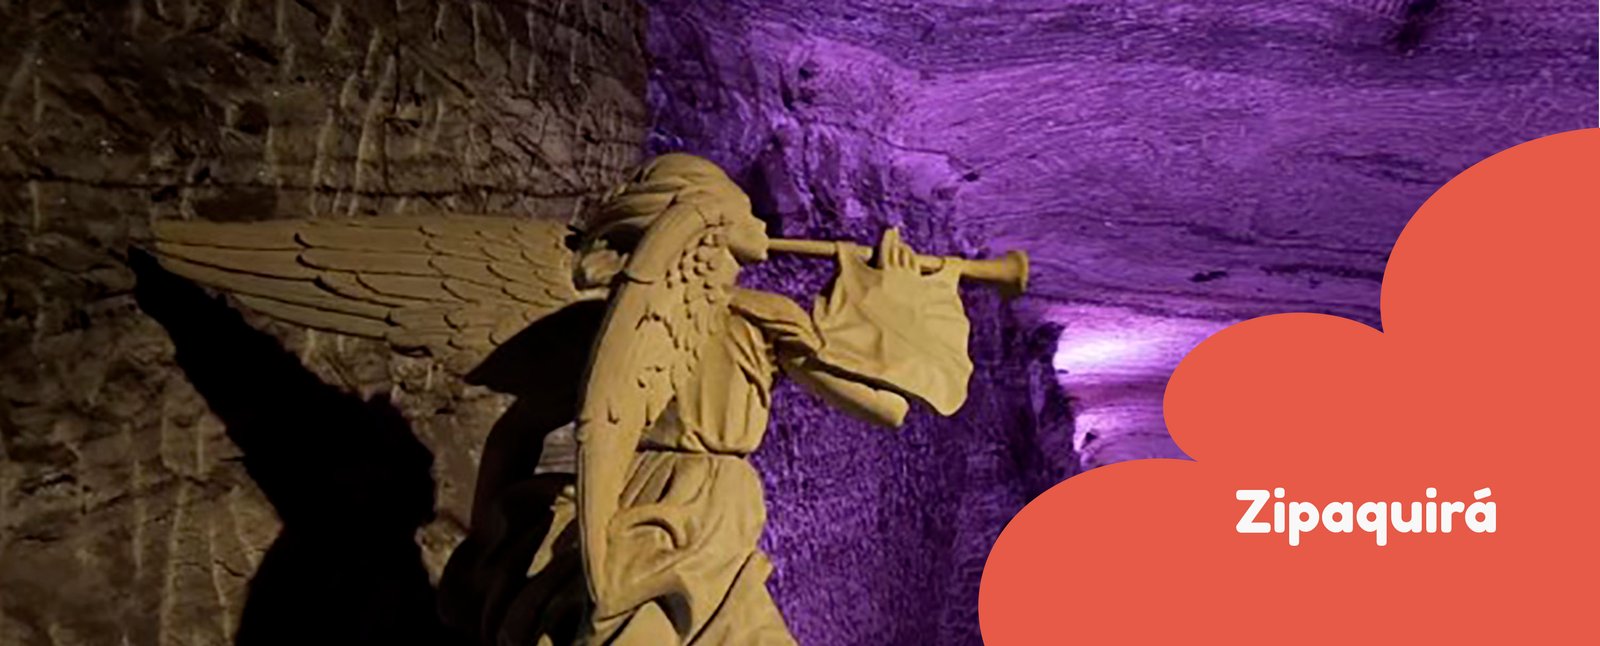 Zipaquirá´s Salt Cathedral Full-Day Tour Starting From Bogotá